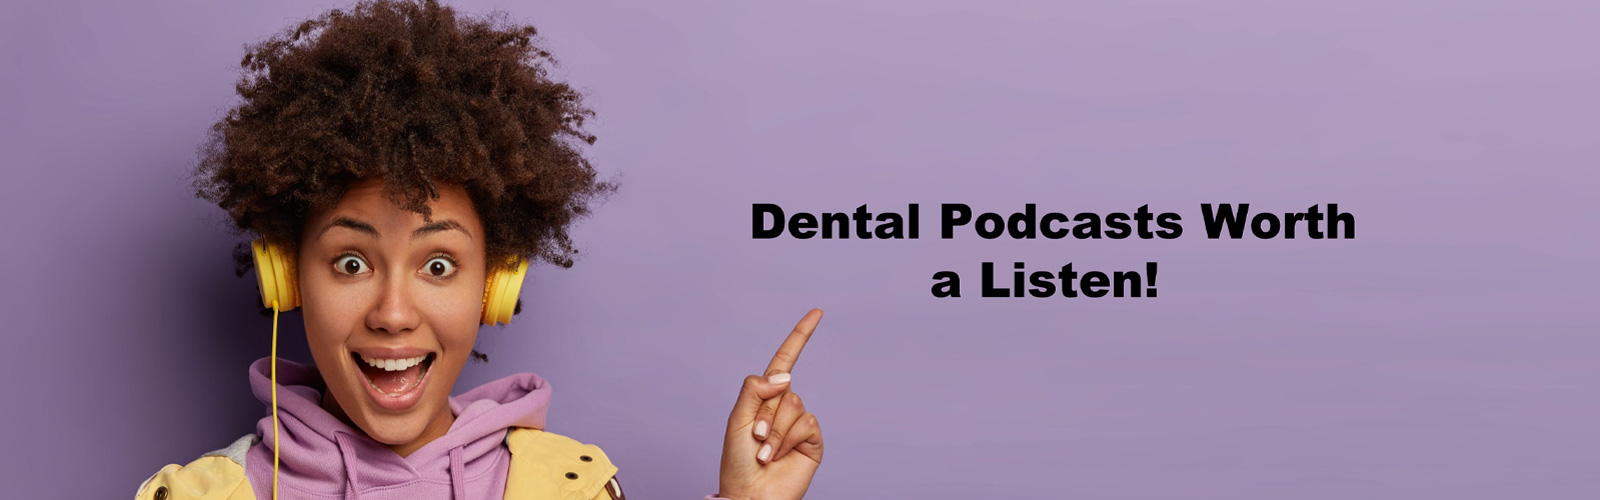 Yes – Dental Podcasts Are Worth a Listen!